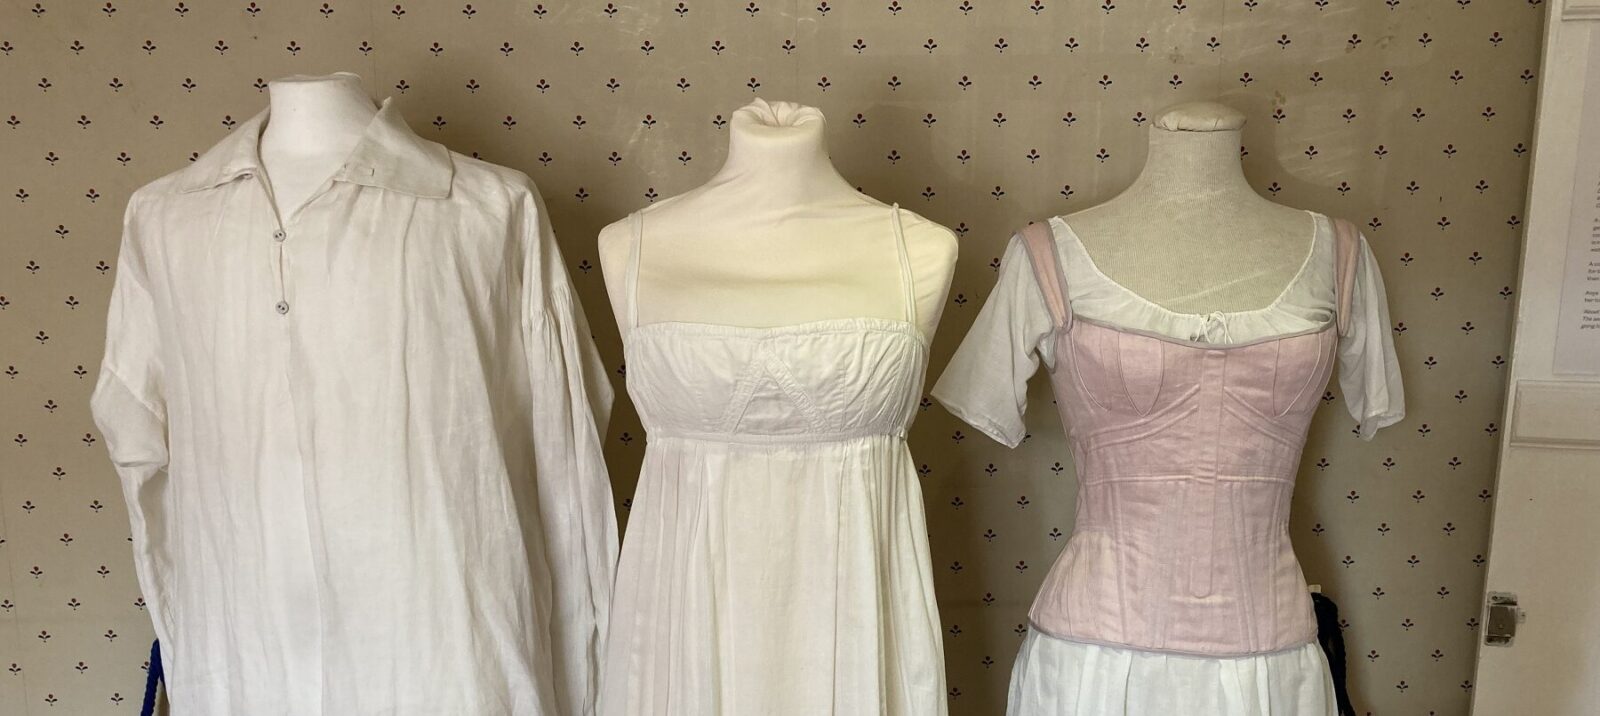 Costume articles on display, L-R: Mr Darcy's white shirt, Lizzy Bennet's muddy petticoat, Emma's pink corset